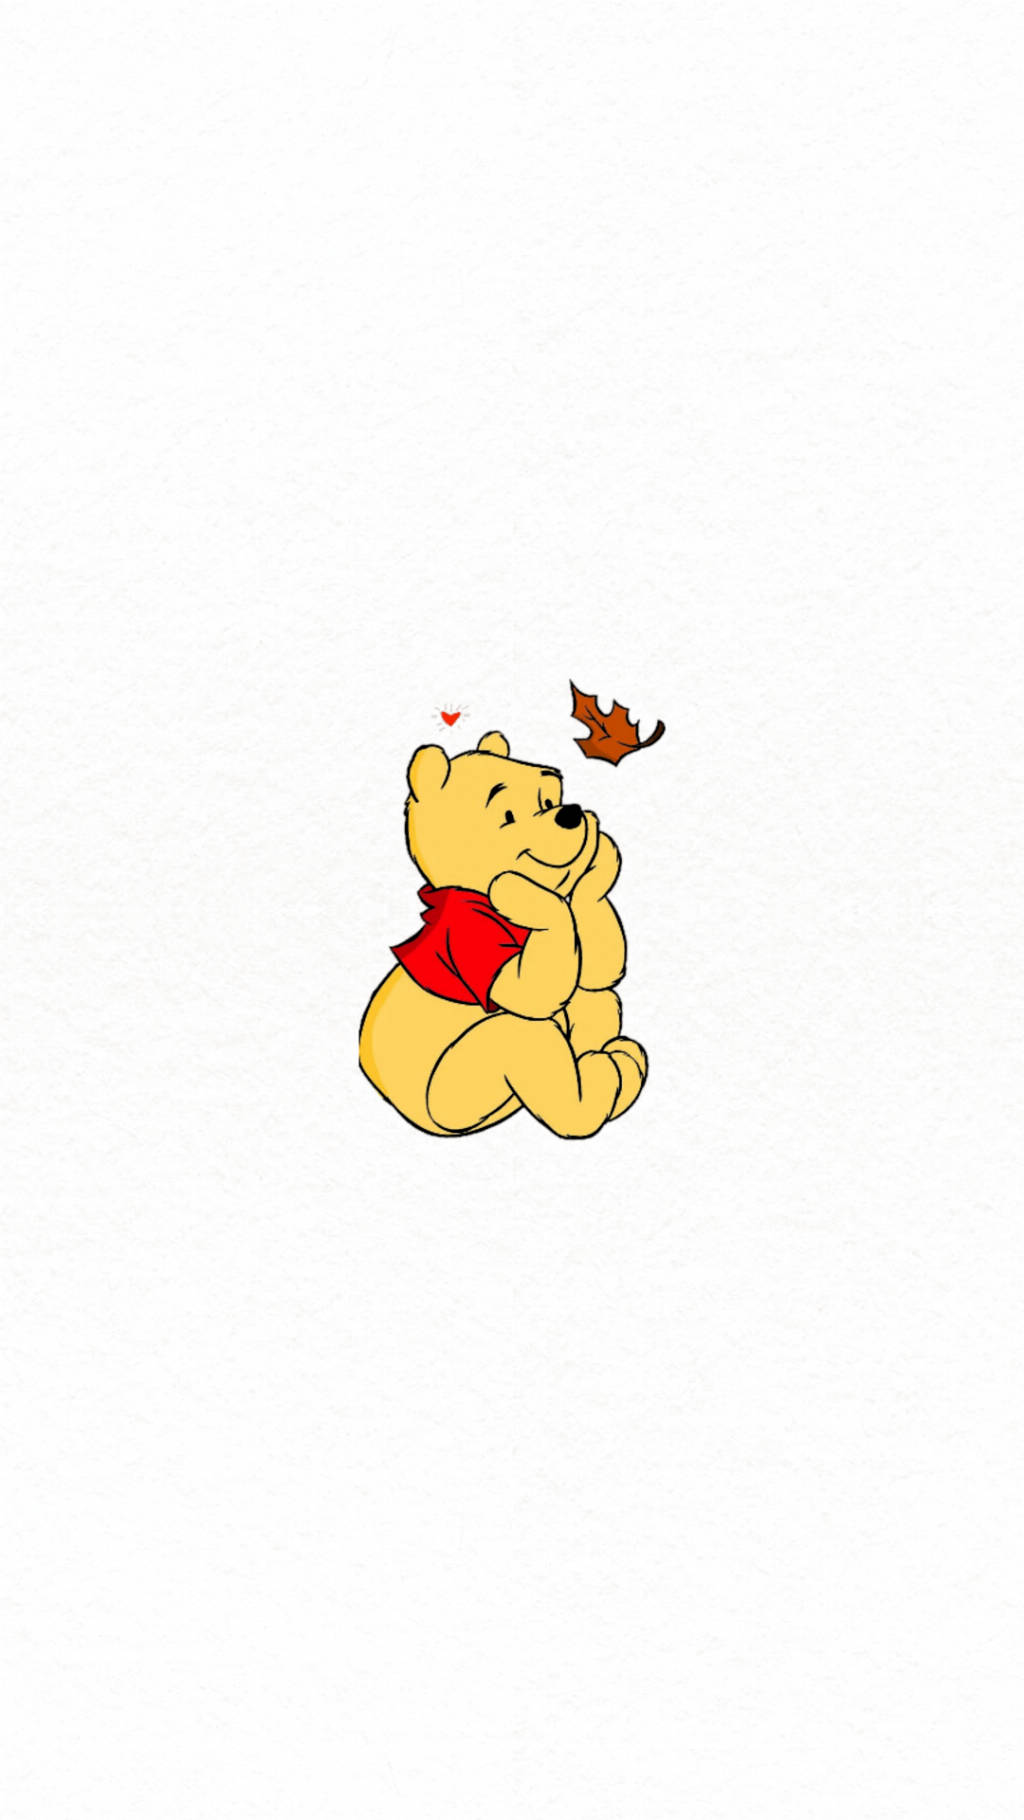 Winnie The Pooh Iphone Wallpaper Wallpapers For Iphone  फट शयर